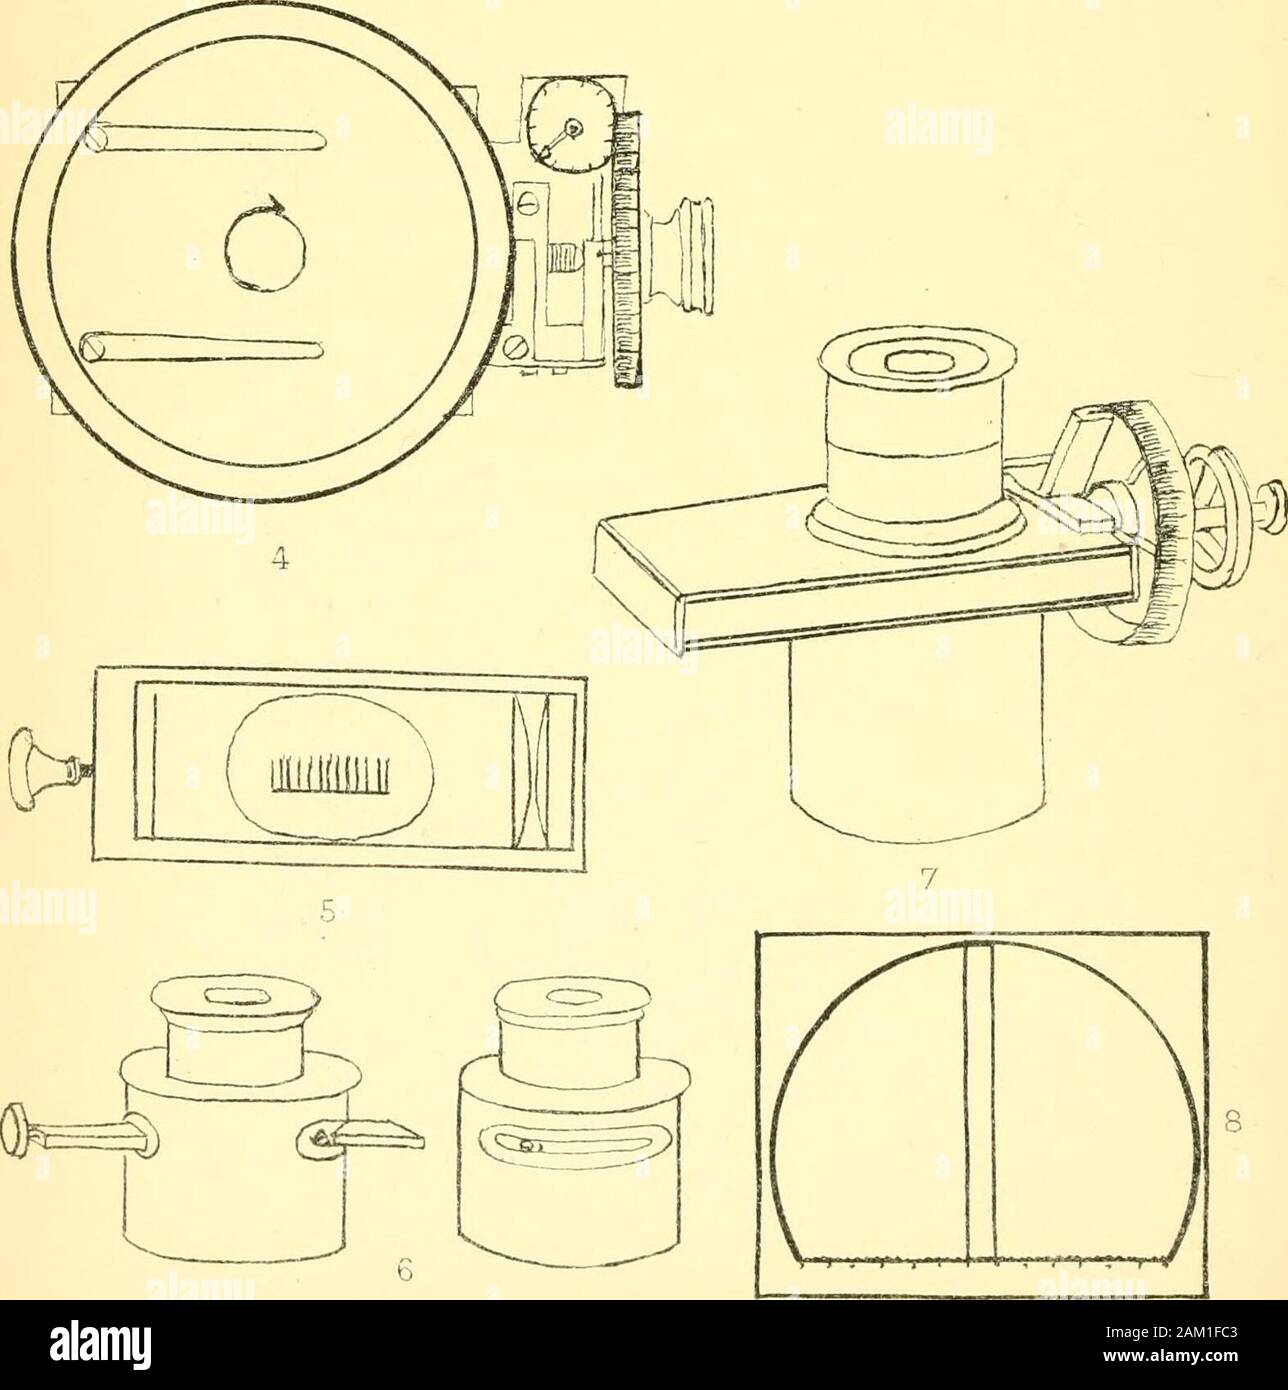 The Journal of microscopy and natural science . o THE KEPIIODUCTION OF (nilUTOLlTES. 347 EXPLANATION OF PLATP: XV. Fig. 1.—Cuffs Wire Micrometer.2.—Bakers Hair MicroiiicLer. 3.- Adams Needle Micrometer. A, B, C, the sectional scale.4.—Zeiss Stage Micrometer.5.—Jacksons Eye-piece Micrometer.6.—Jacksons Micrometer Eye-piece.7. — Ramsdens Micnuneter Eye-piece.8.—The scale of the same. ©11 the 1Rcpro^uctiou of iS)rbitoltte9/ By J. J. Lister, M A. MR. H. B. Br.dy has described specimens of Orbitoliteswhich he obtained in Fiji, showing the margin of the disccrowded with young shells. Mr. Bradys mat Stock Photo